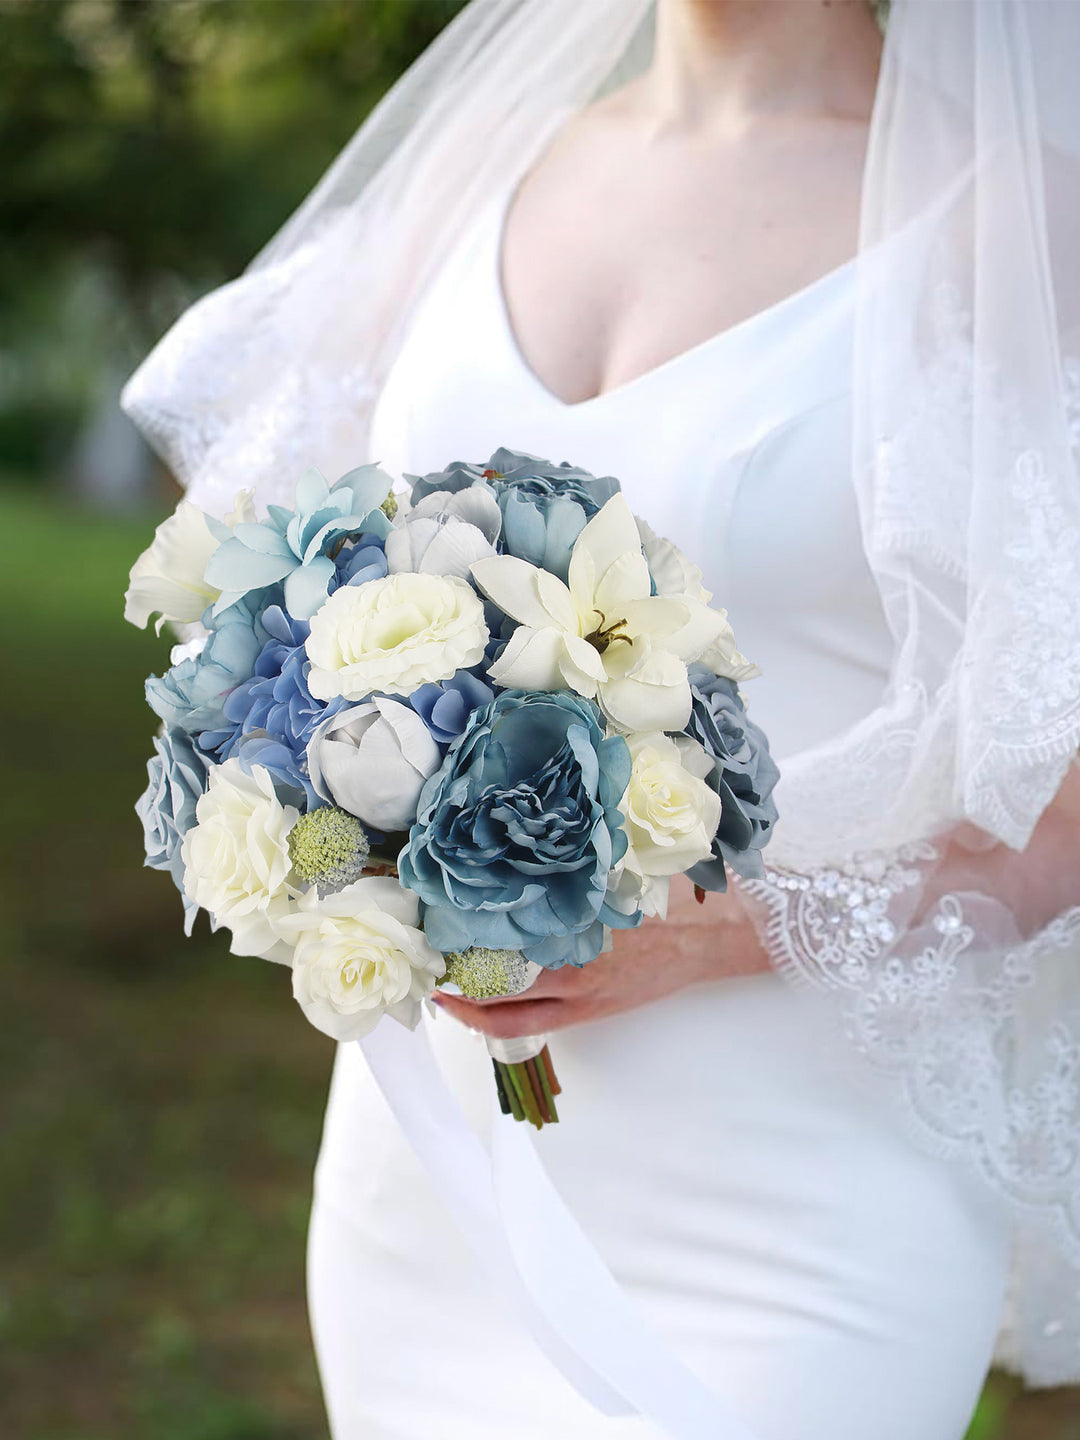 What Does The Color Blue Mean In A Wedding?